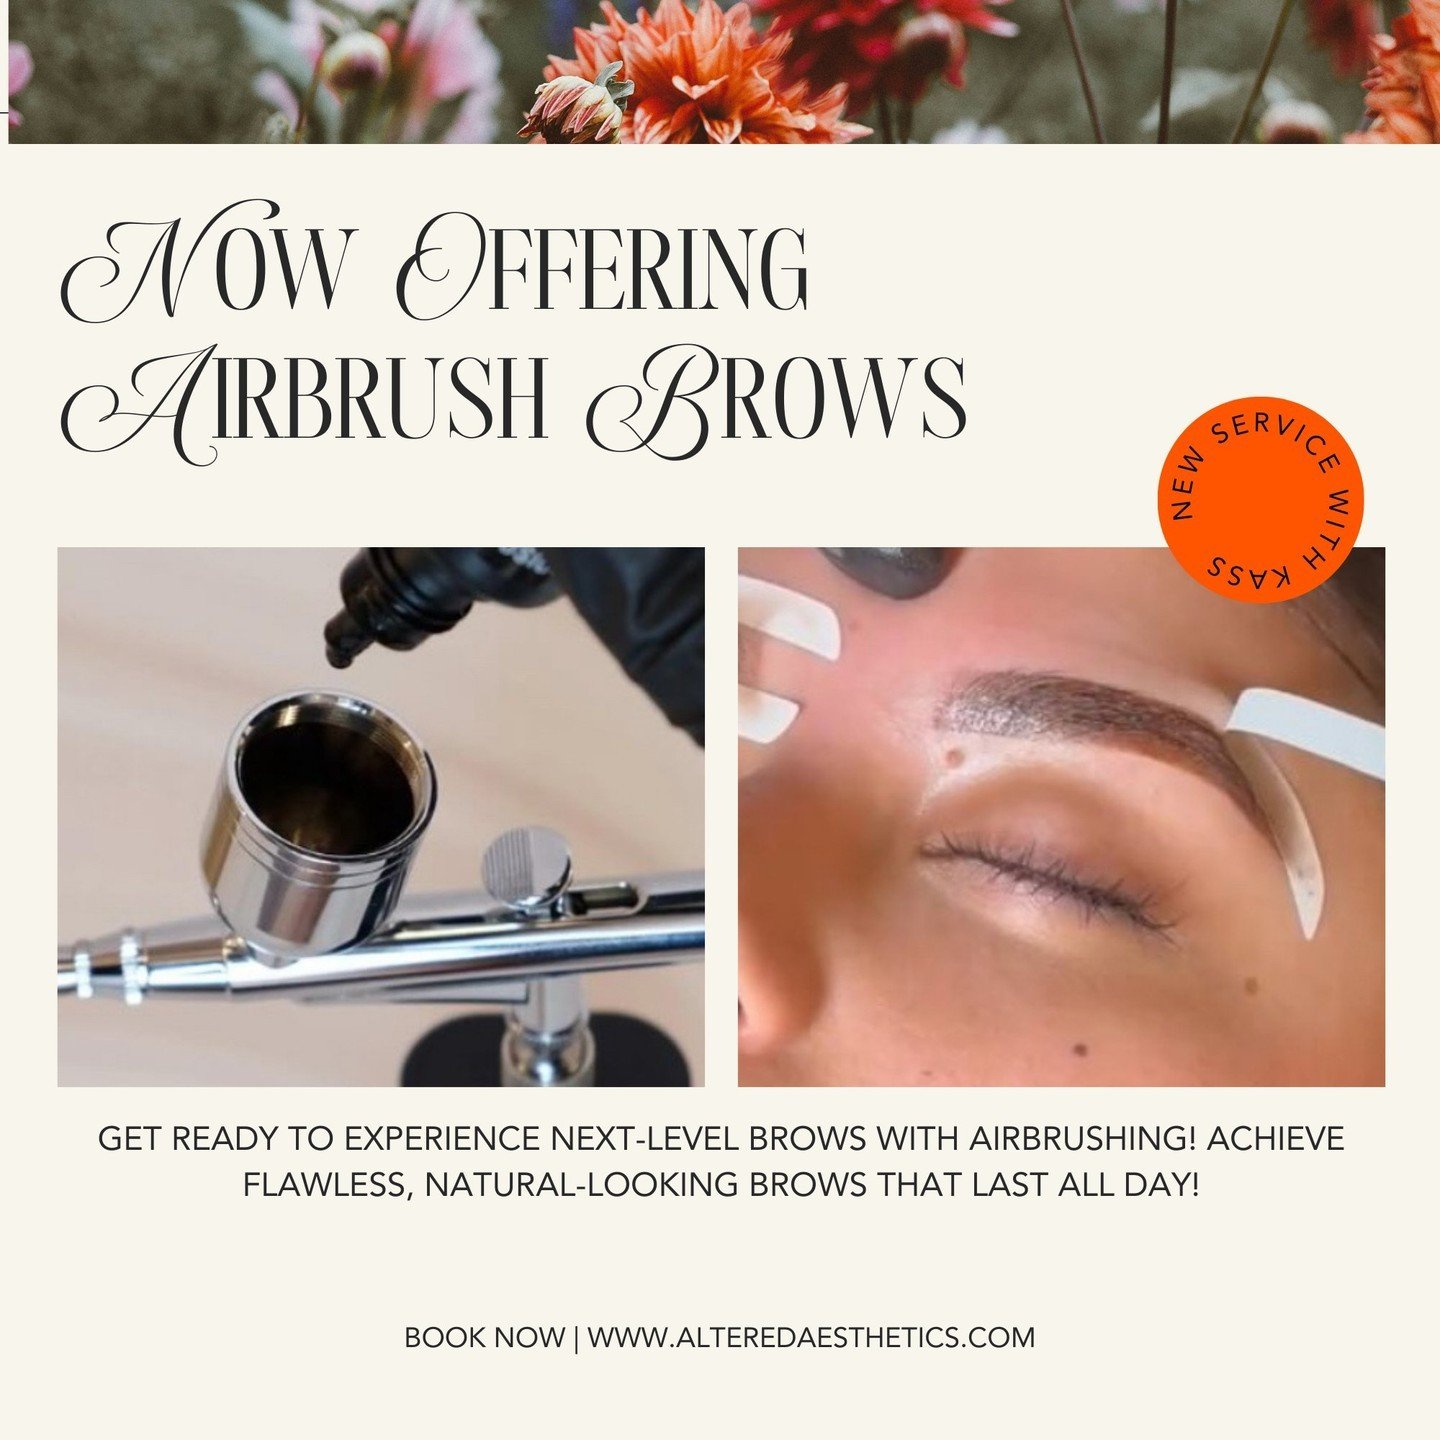 Revolutionize your brow game with Airbrush Brows! Kass is now offering this exclusive service, available on its own or as an add-on to your Brow Wax or Brow Lamination. Are you ready for brows that STUN, with skin staining lasting up to 7-10 days and